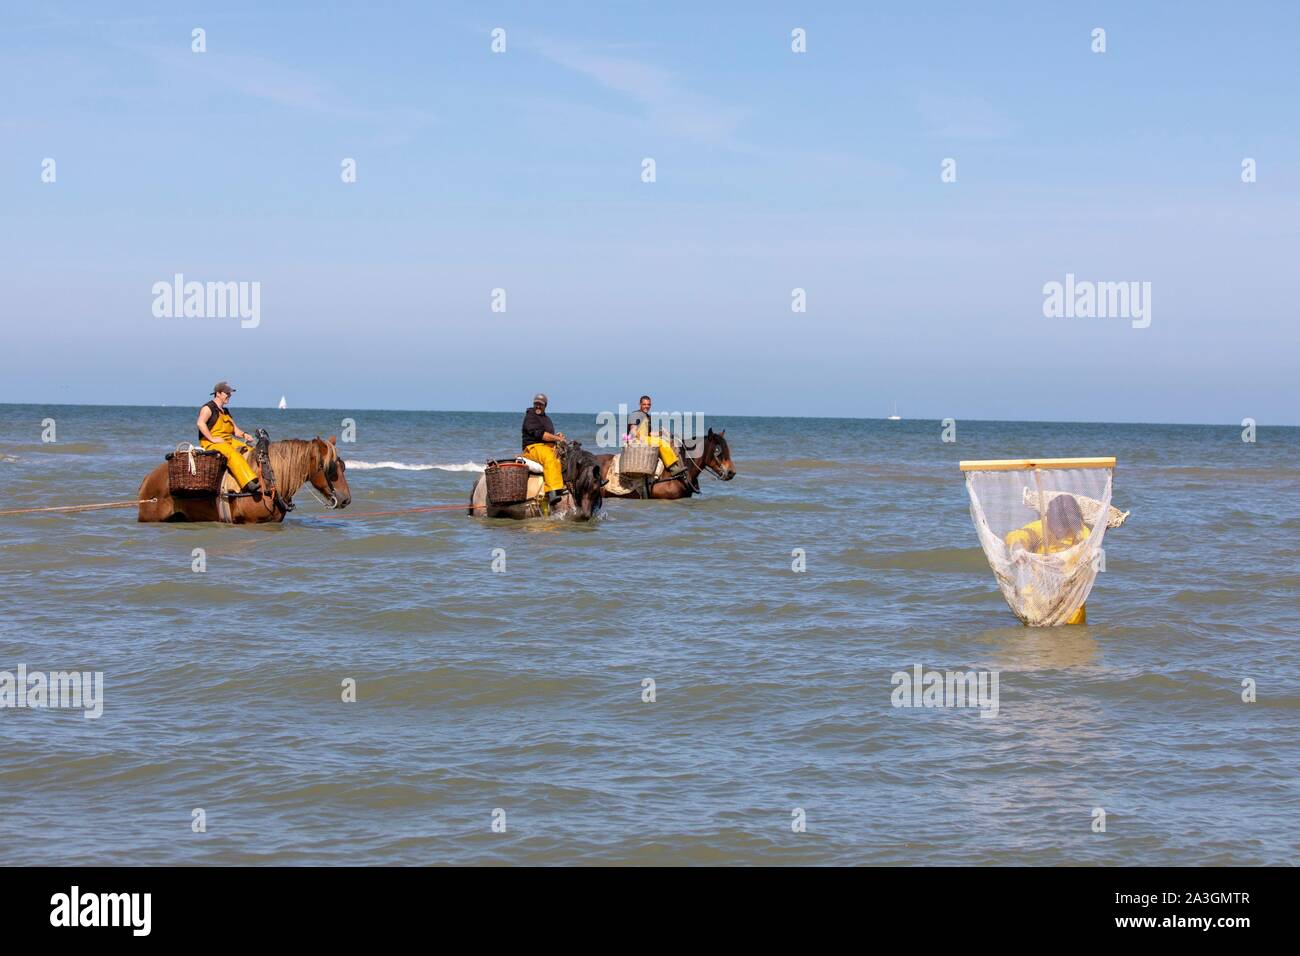 Belgium, West Flanders province, Koksijde, Oostduinkerke, the shrimp fishing on horseback is a type of fishing unique in the world, recognized as intangible cultural heritage of humanity by UNESCO in 2013 whose tradition goes back several centuries Stock Photo